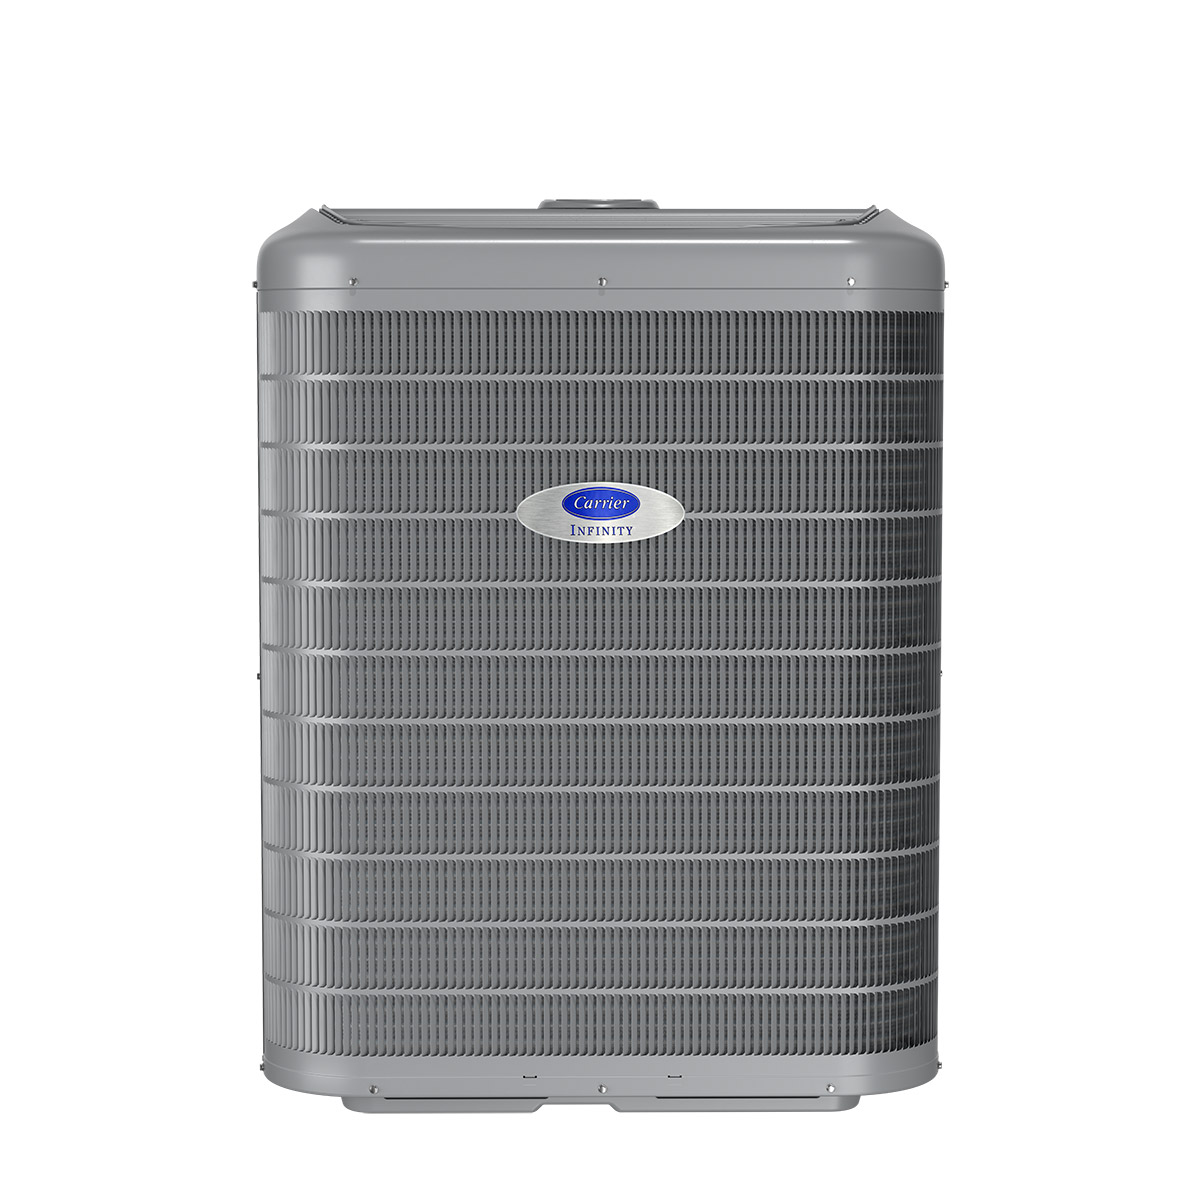 Infinity 26 Air Conditioner with Greenspeed Intelligence 24VNA6